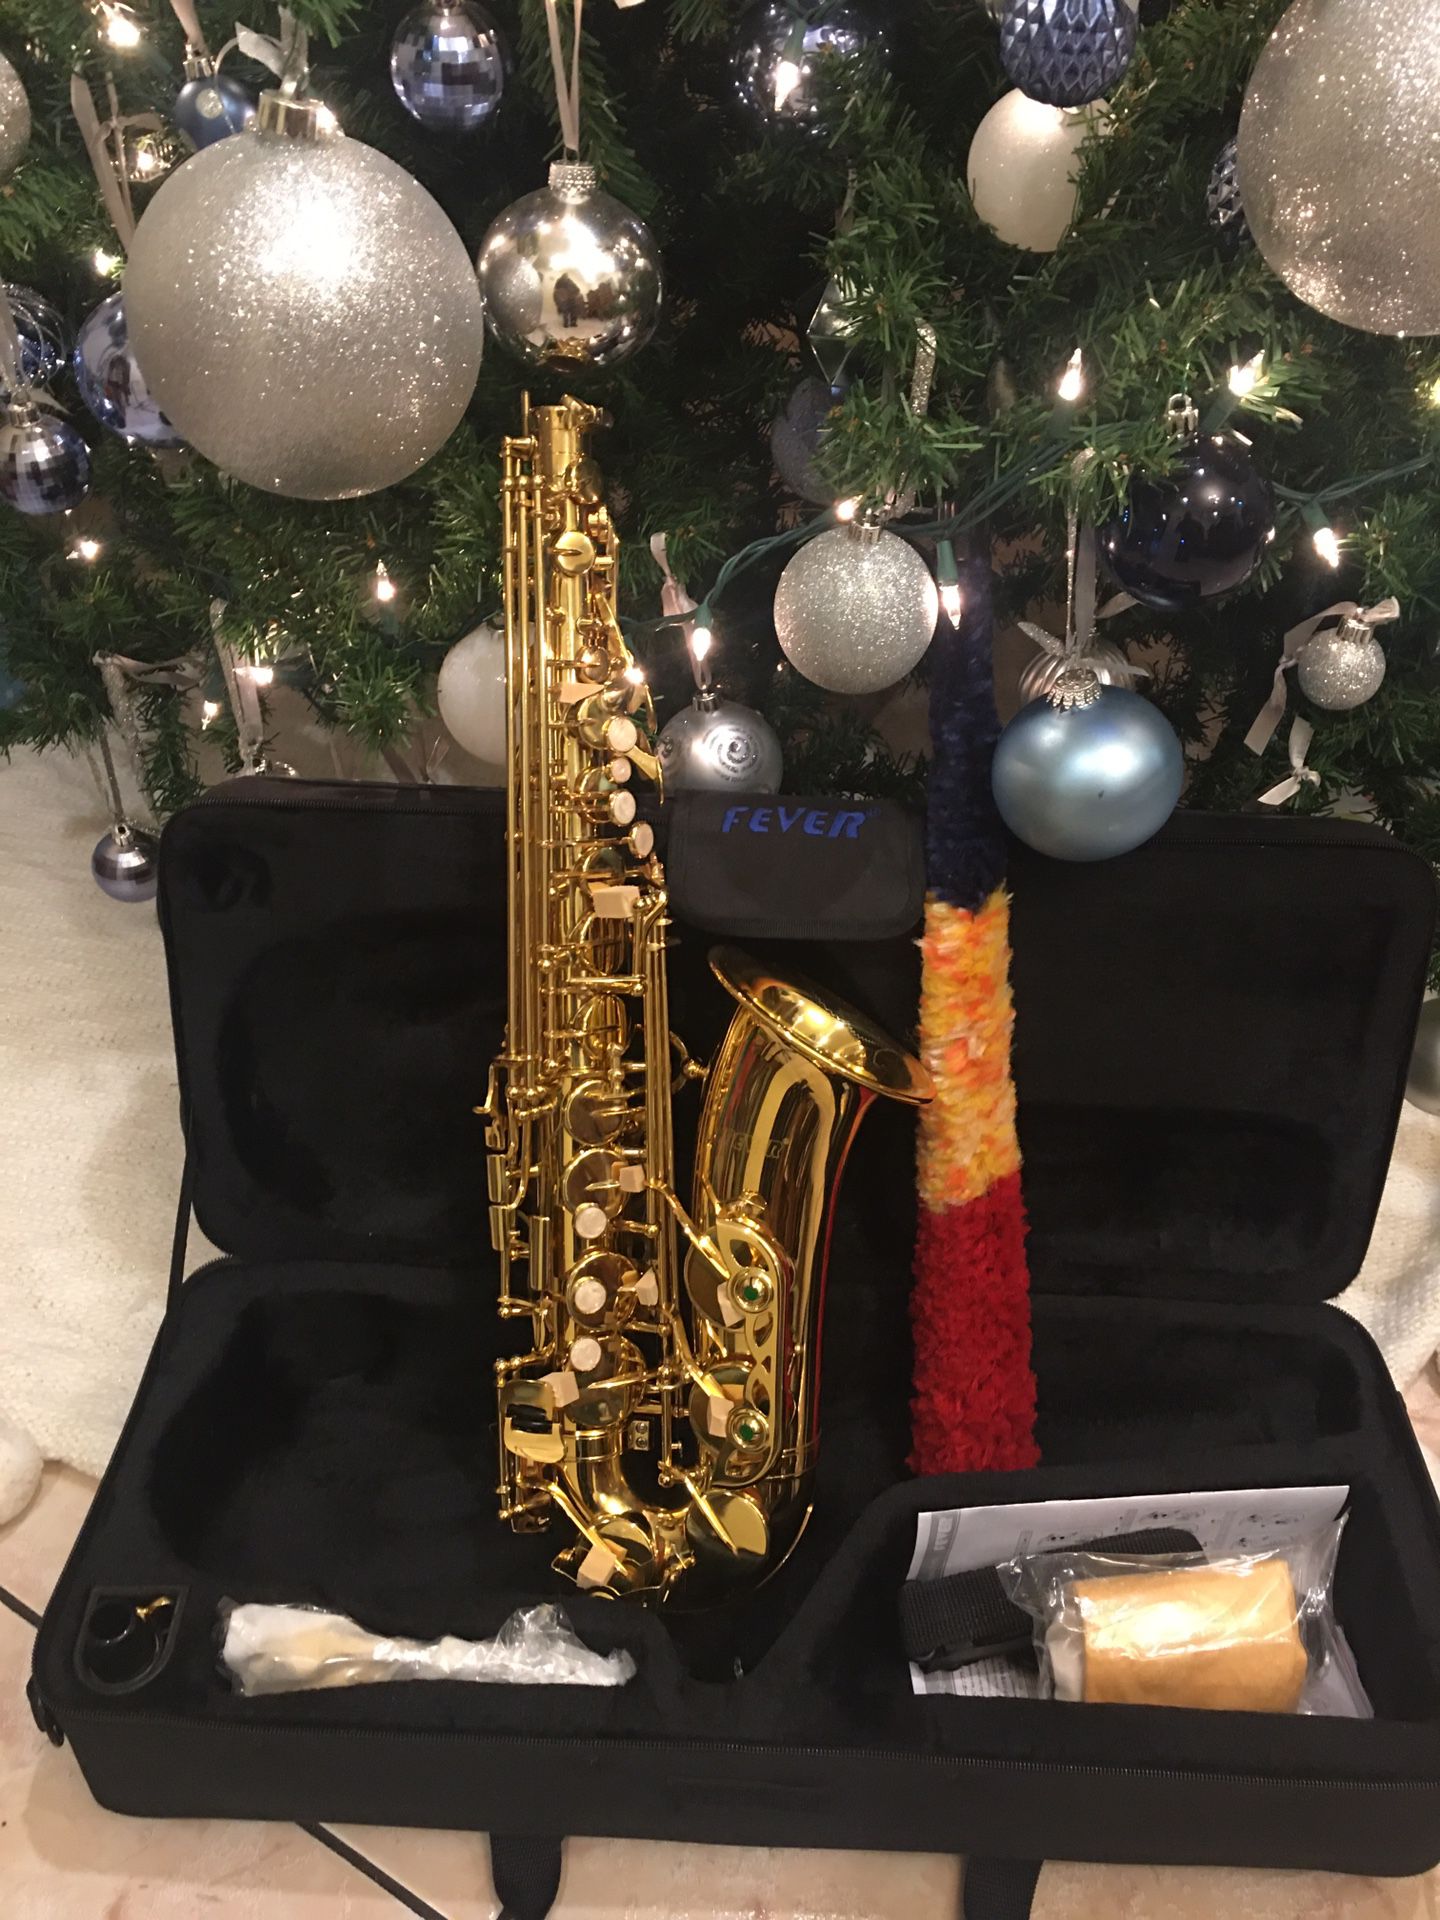 Fever alto saxophone with case mouthpiece neck strap cleaning cloth and gloves